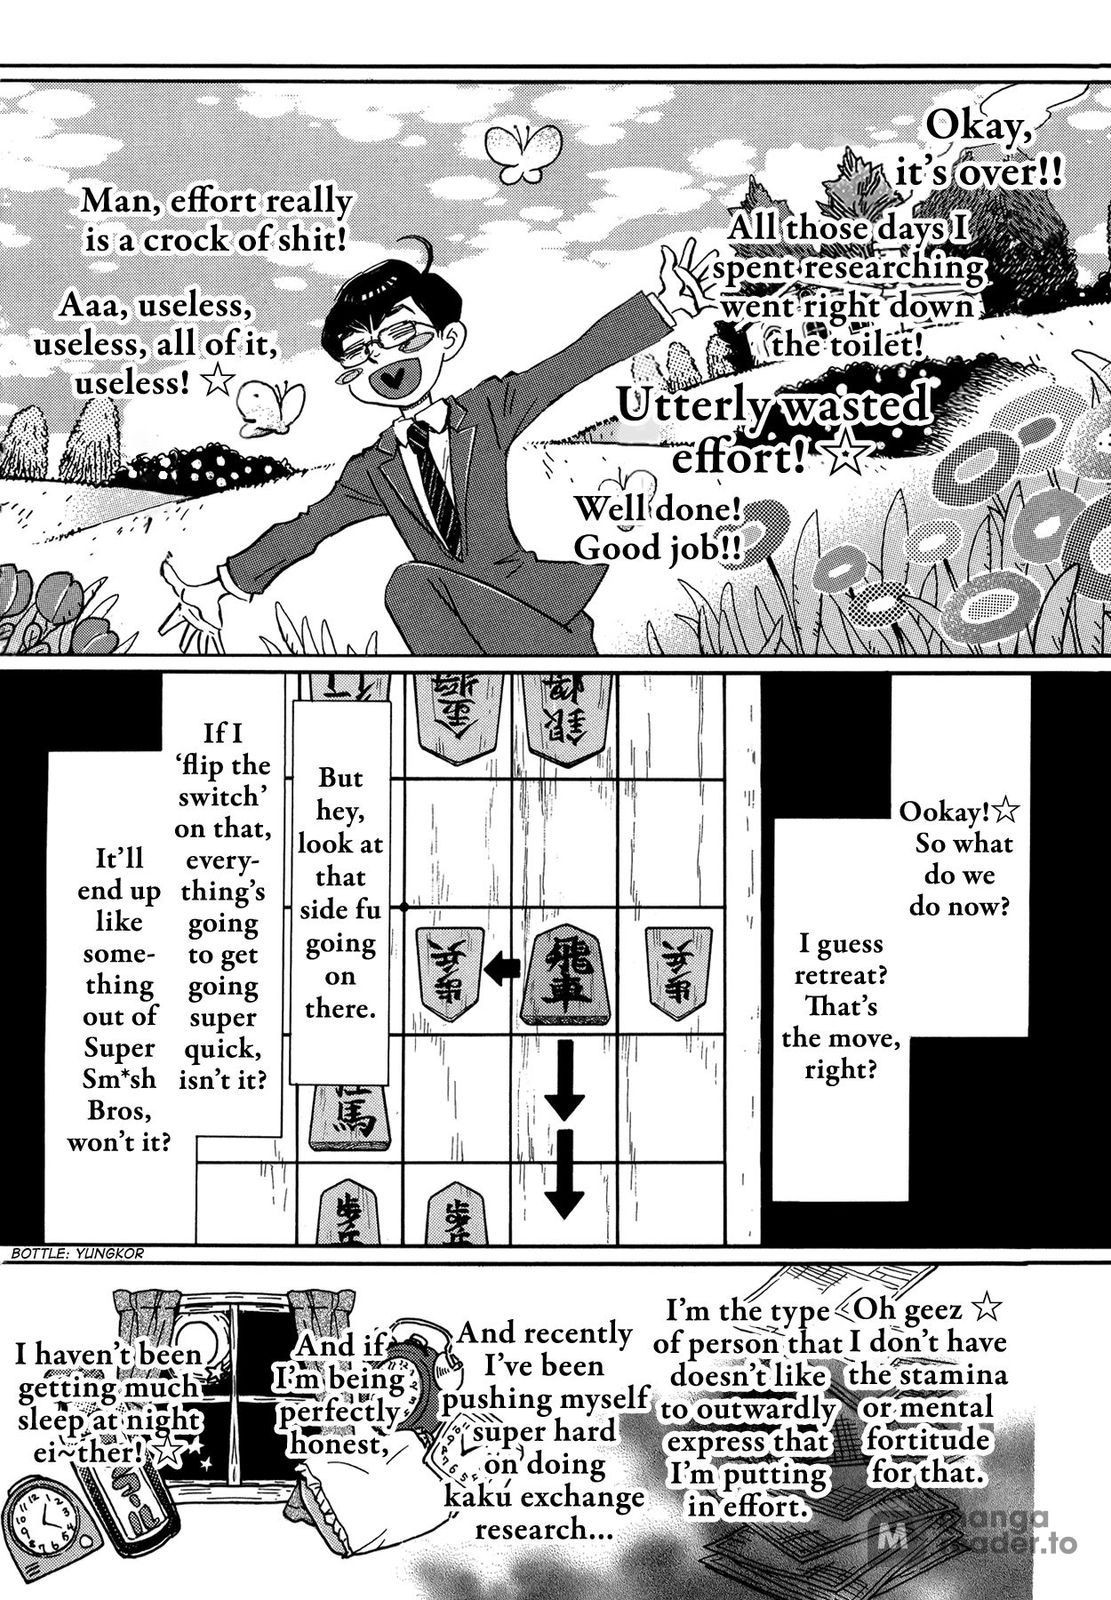 March Comes in Like a Lion, Chapter 158 Azusa Number 1 (Part 3) (EN) image 10